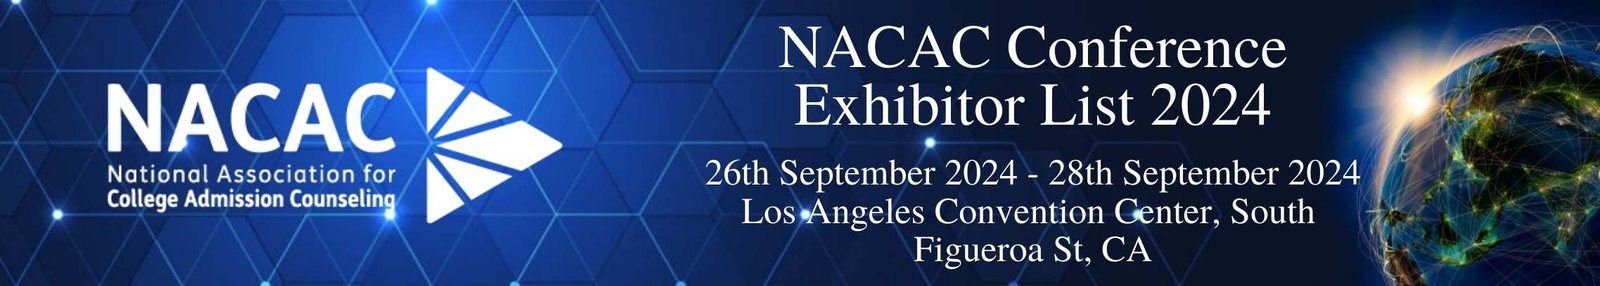 NACAC Conference Exhibitor List 2024